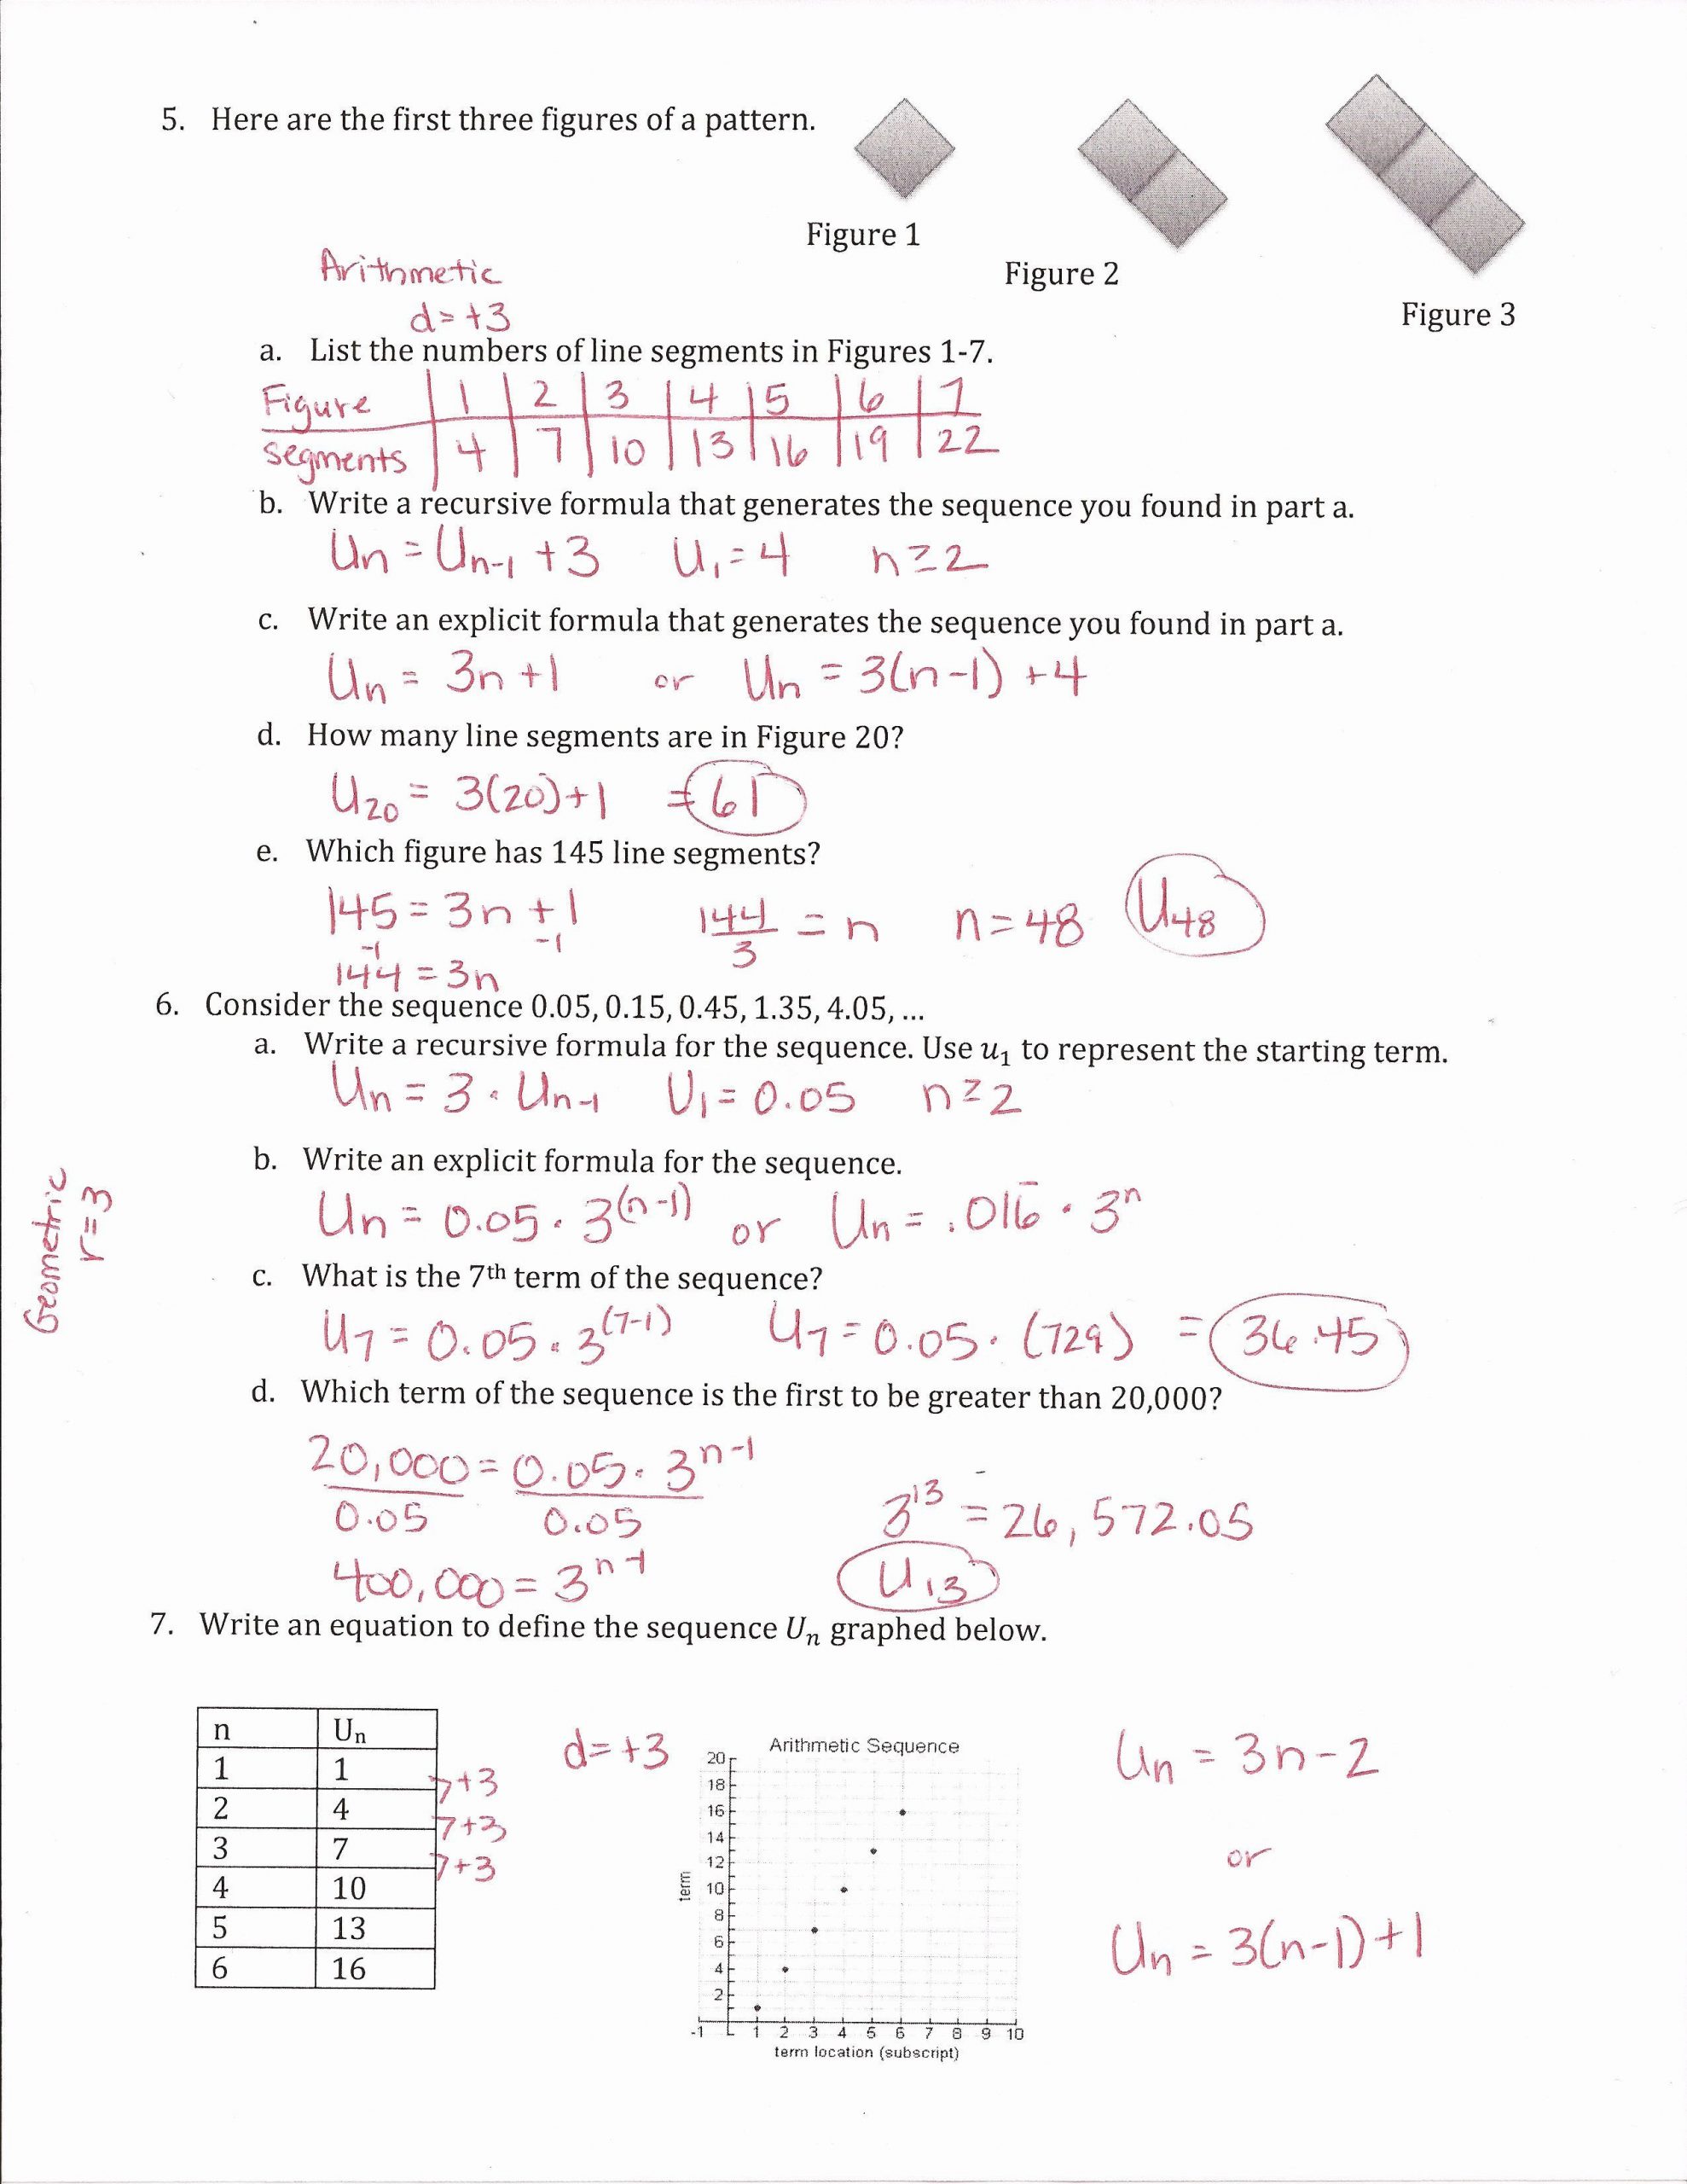 Arithmetic and Geometric Sequences Worksheet 50 Arithmetic Sequence Worksheet Answers In 2020